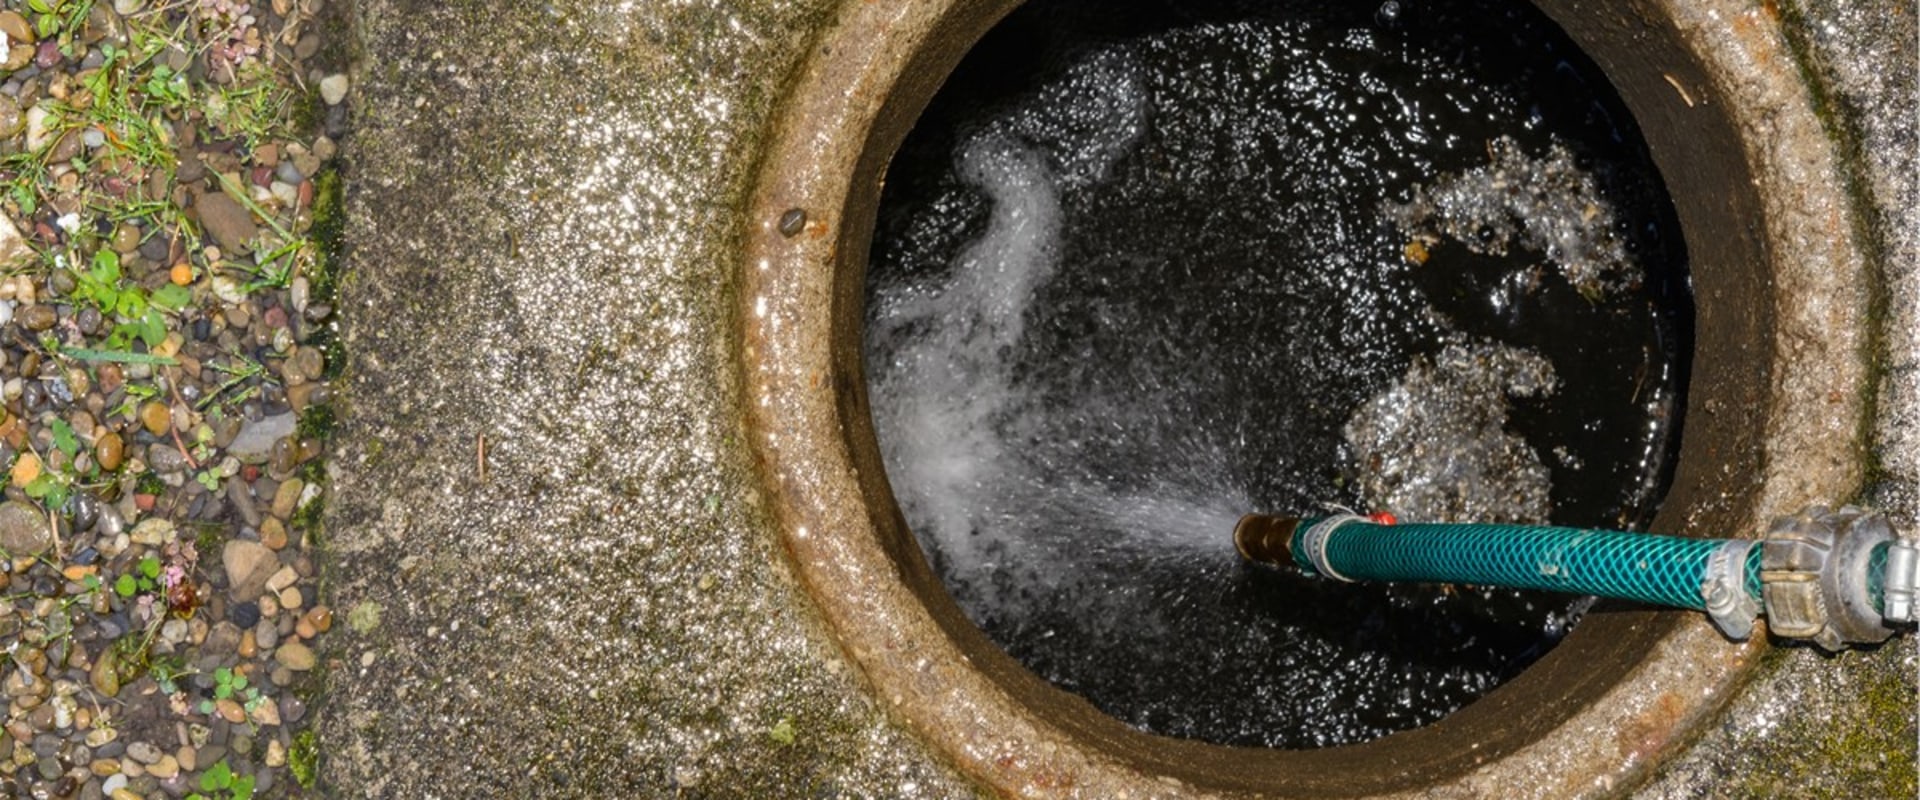 Drain Cleaning: An Overview of Commercial Plumbing Services